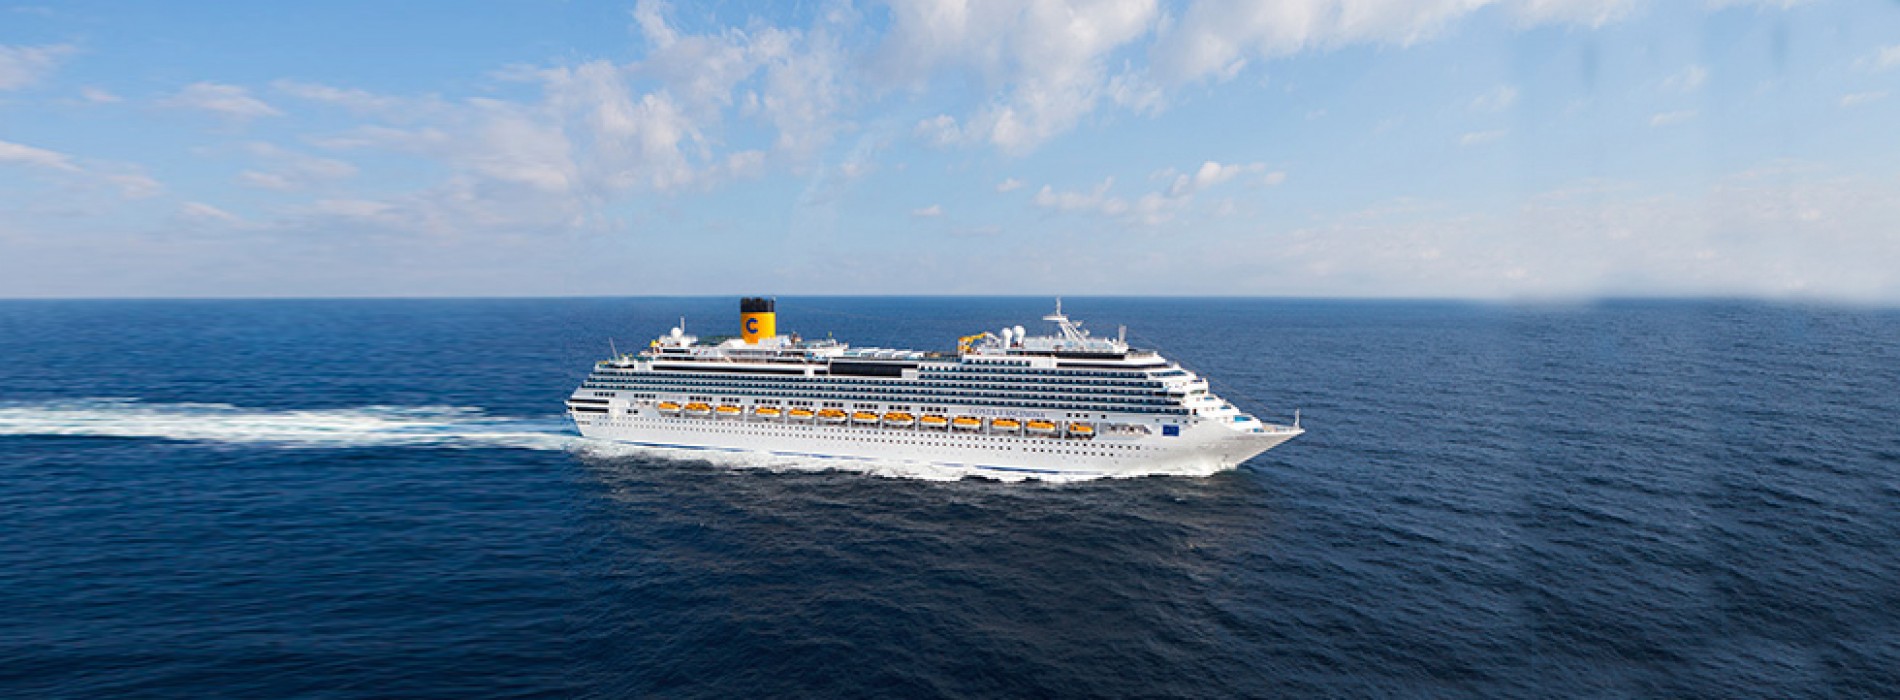 Italy’s Costa Cruises launches first domestic Indian luxury cruise